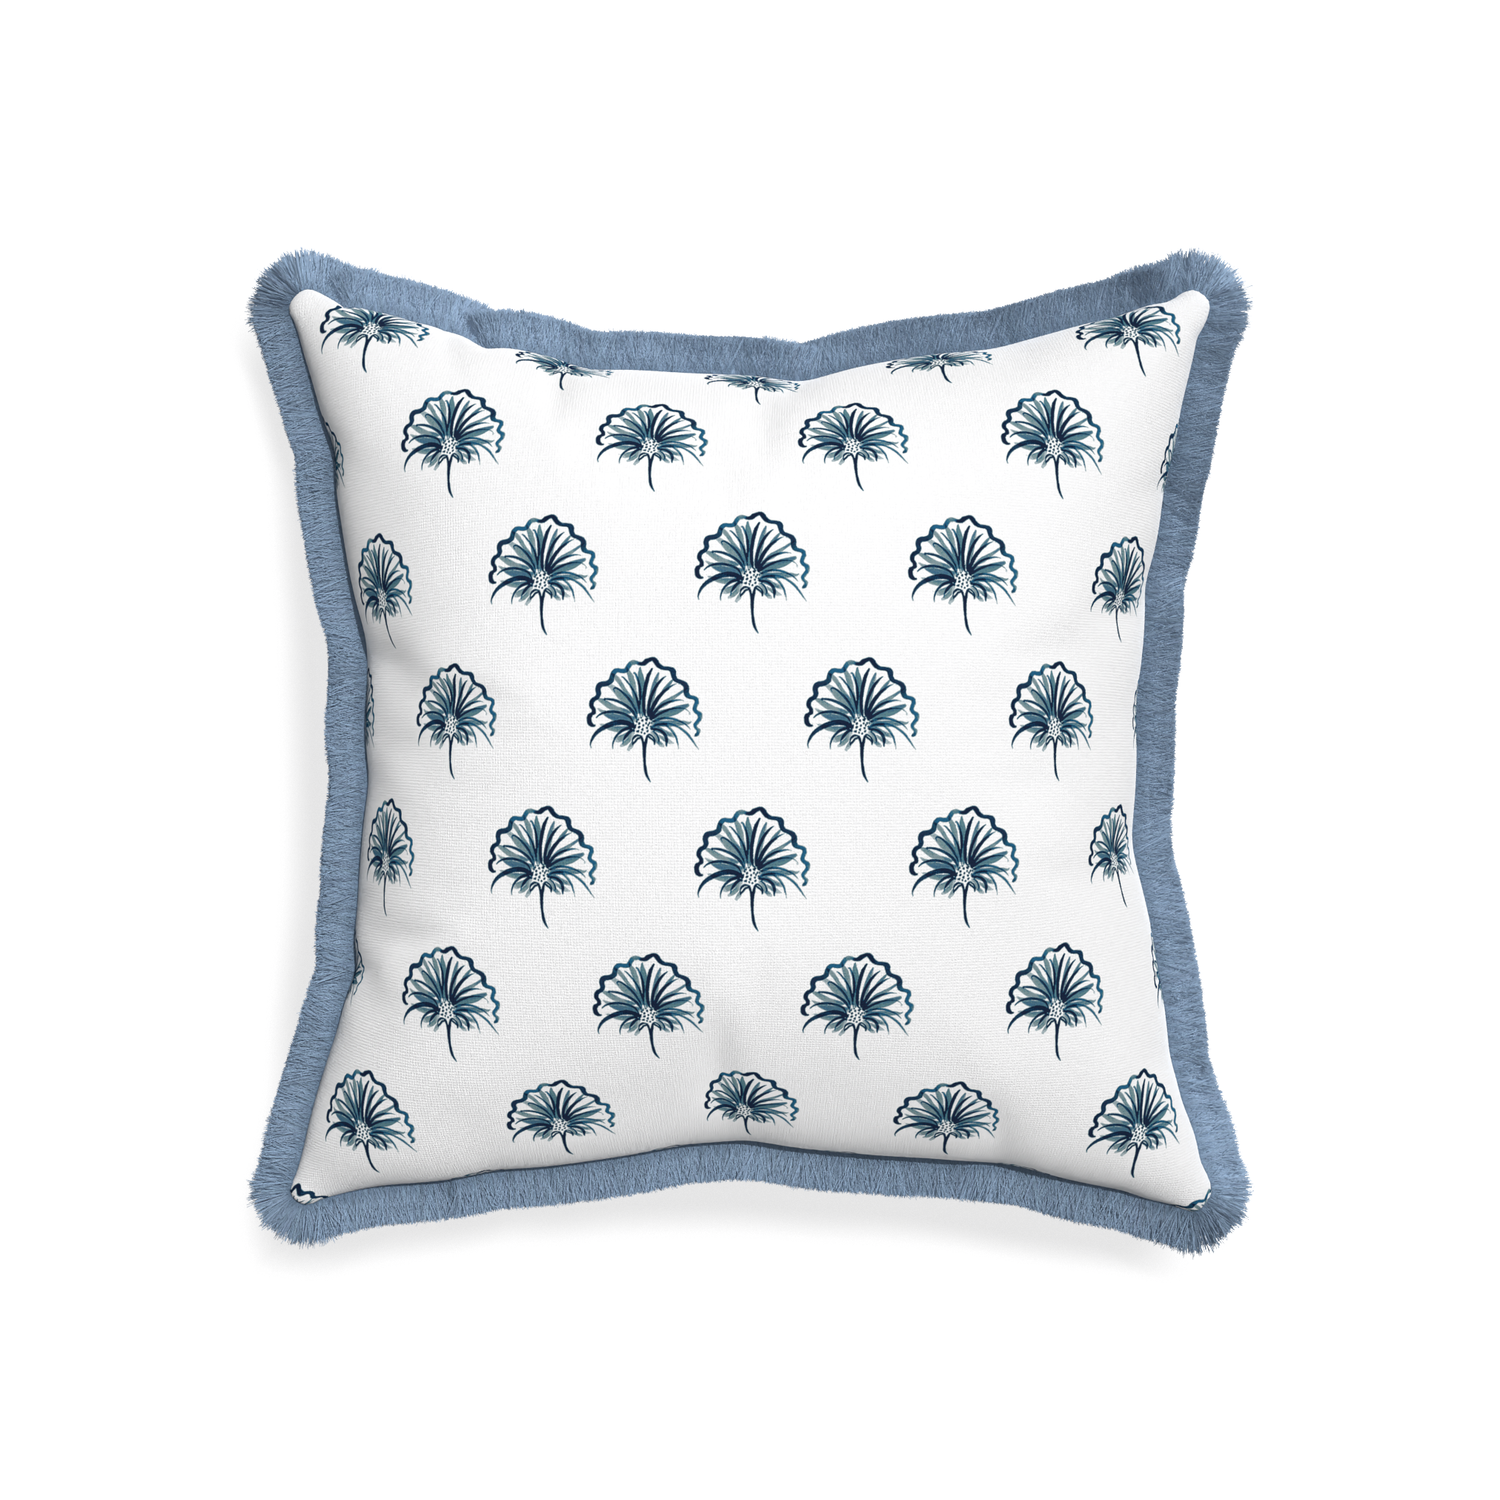 20-square penelope midnight custom floral navypillow with sky fringe on white background